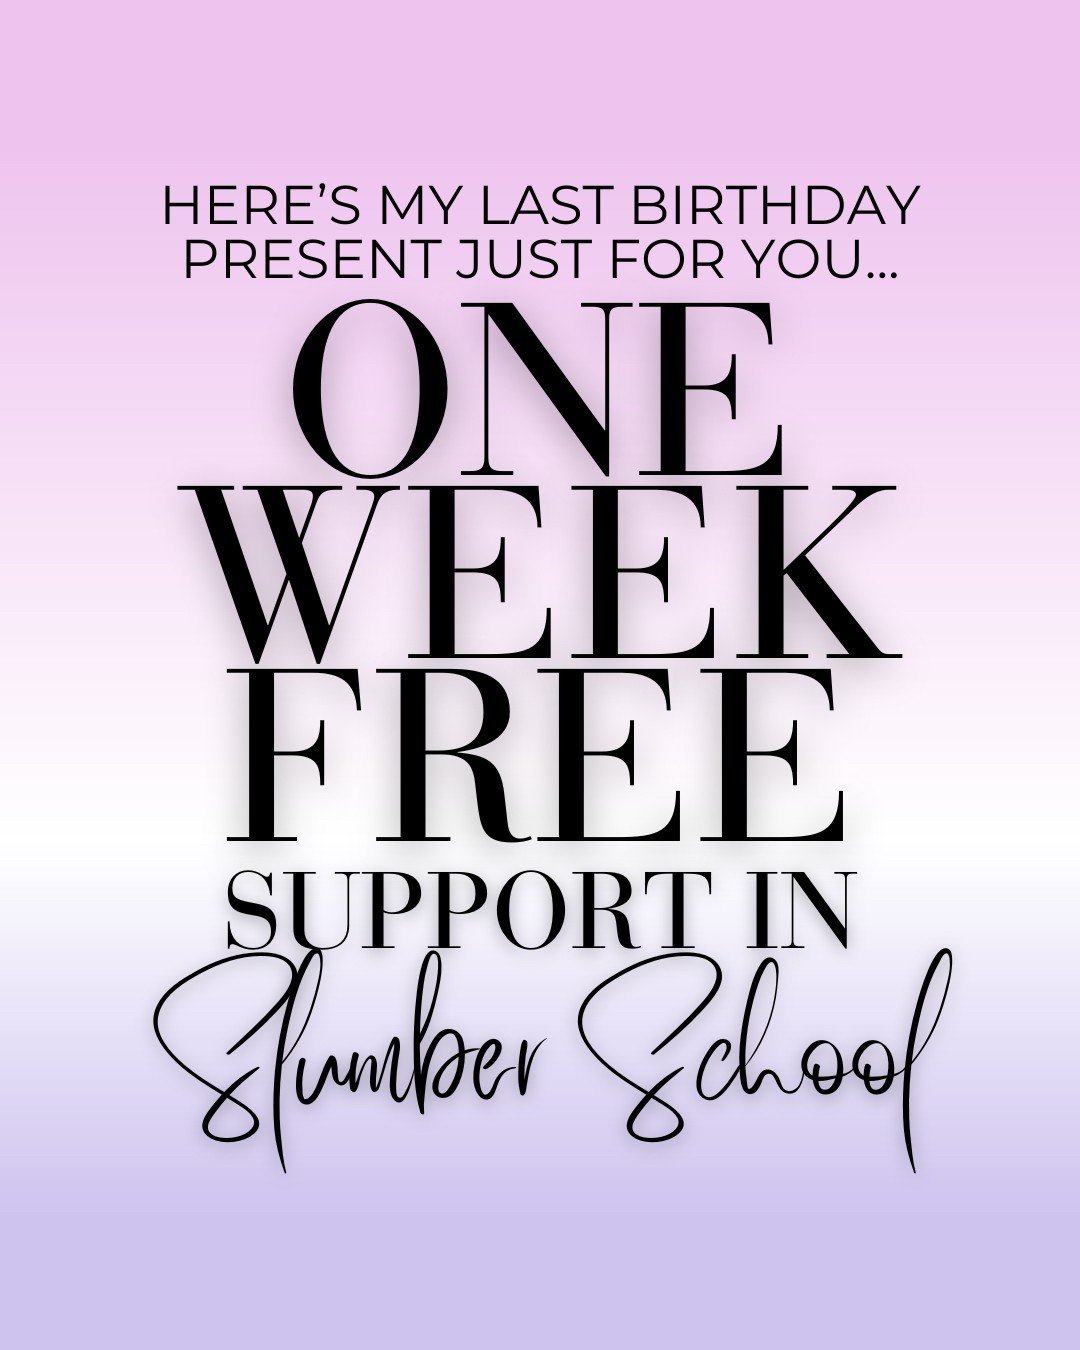 I&rsquo;ve saved one of my best birthday treats for last 🎈🥰
 
I&rsquo;m going to gift 3 parents with 1 FREE WEEK OF SLUMBER SCHOOL SUPPORT...... just because 😊
 
To be one of these lucky parents.... you have to guess right the answers to the below